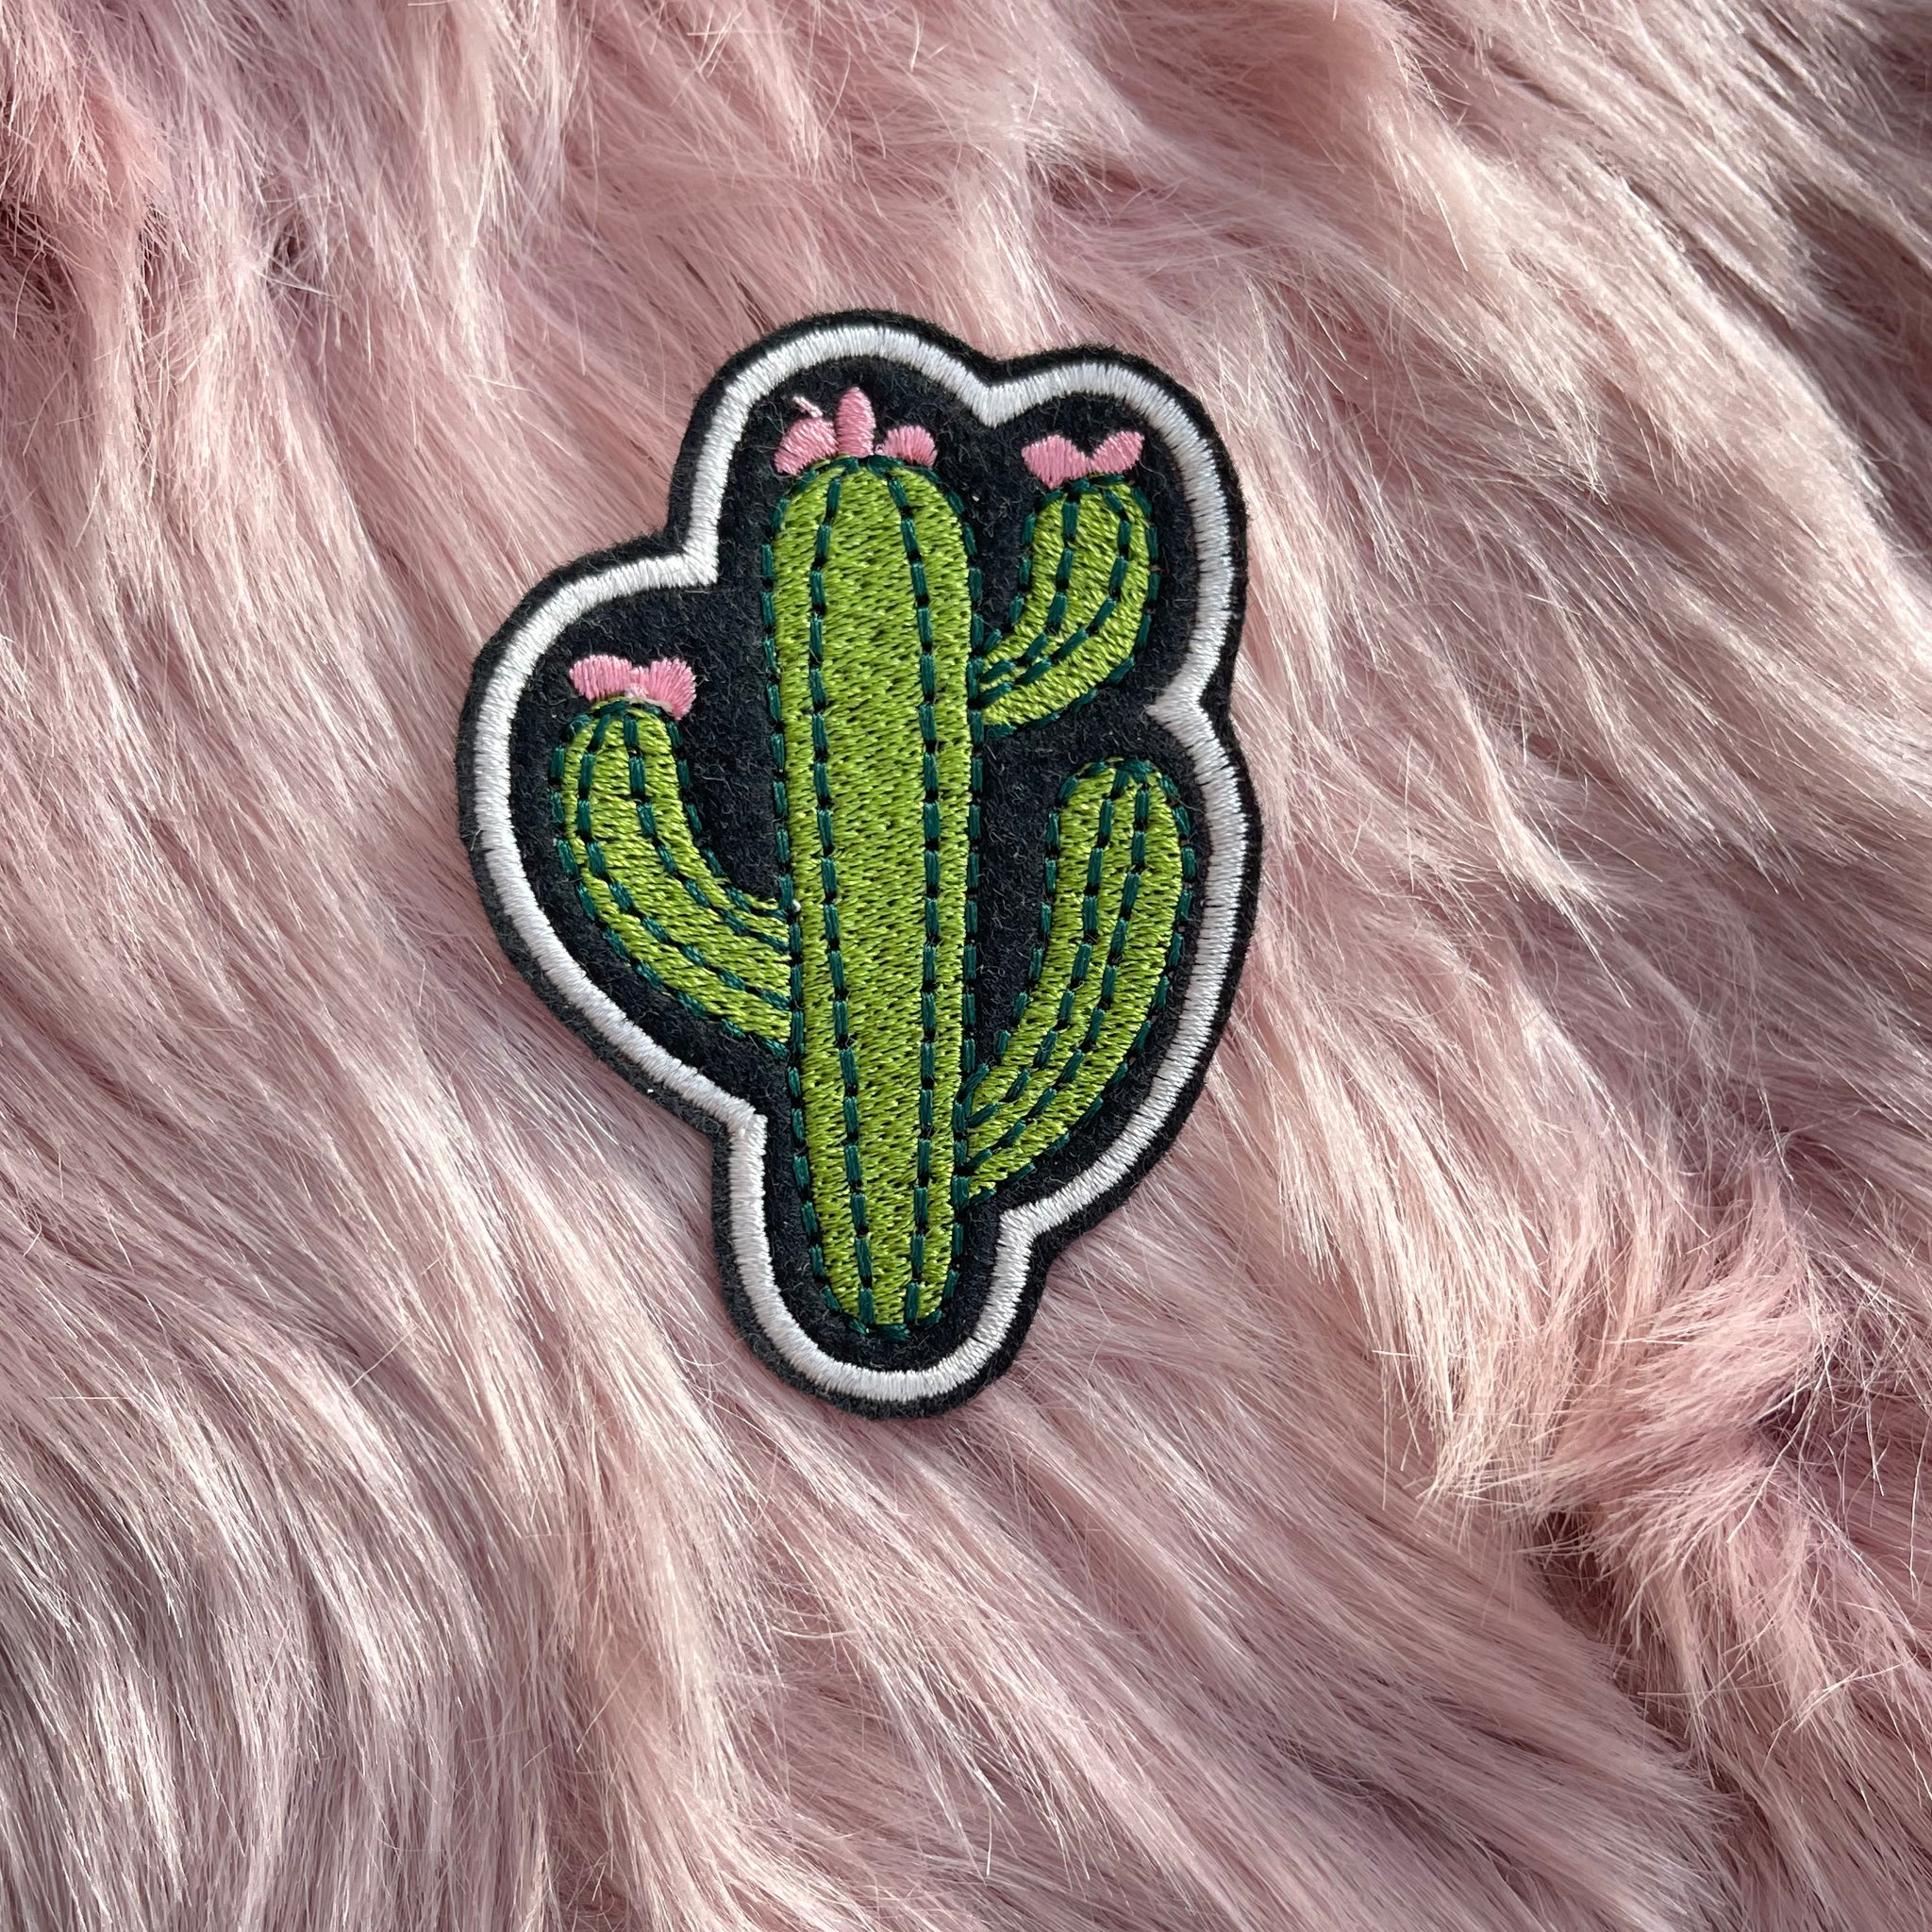 Cute Cactus Embroidery Iron On Embroidered Patch